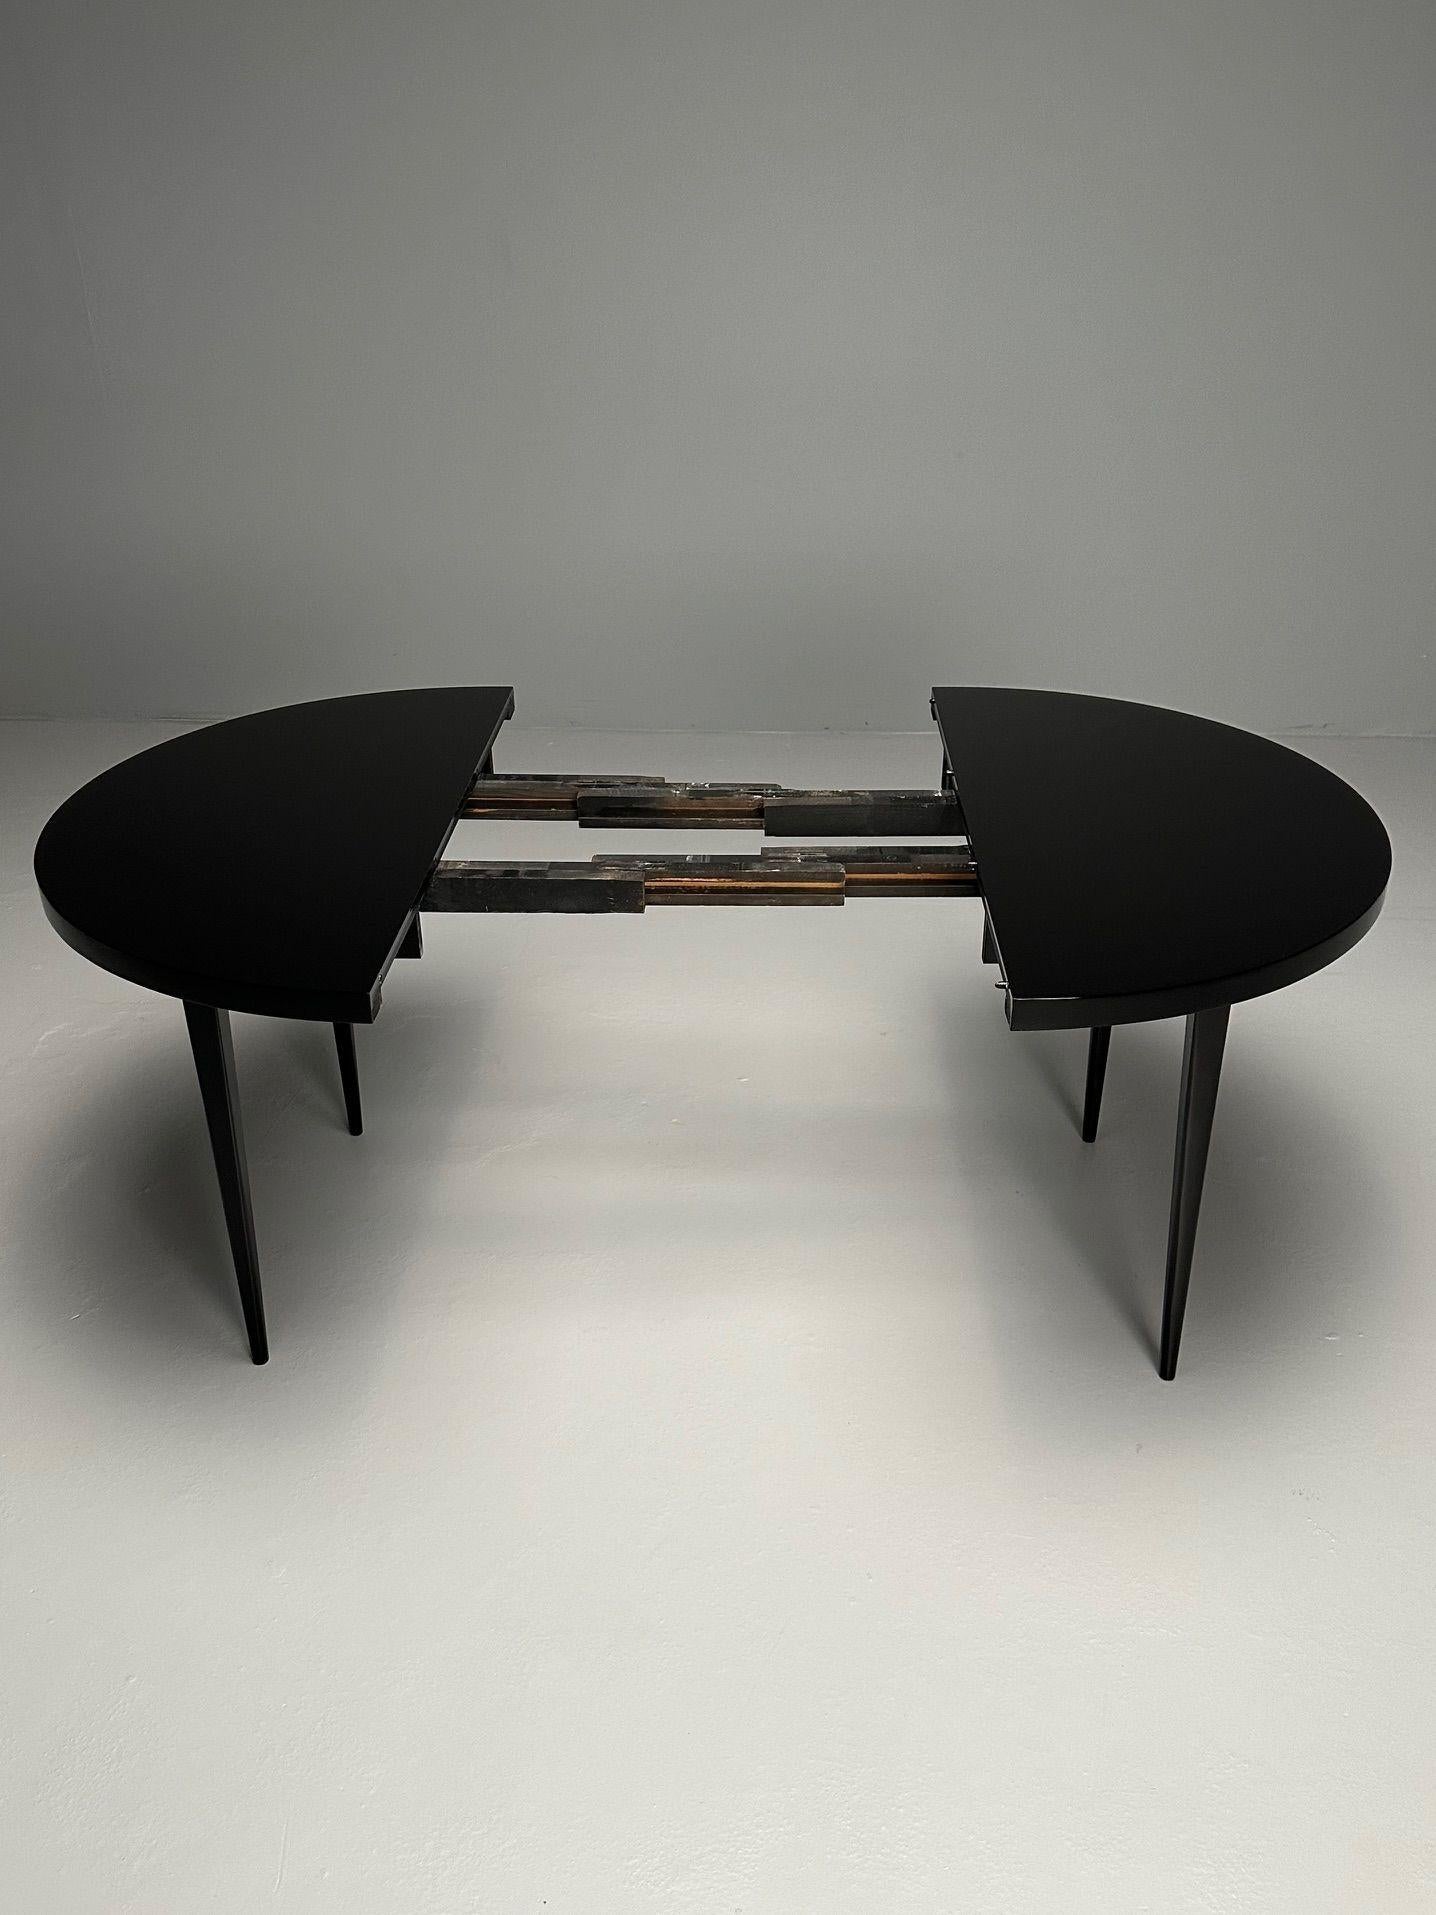 Paul McCobb, Mid-Century Modern Planner Group Dining Table, Black Lacquer, 1950s For Sale 9